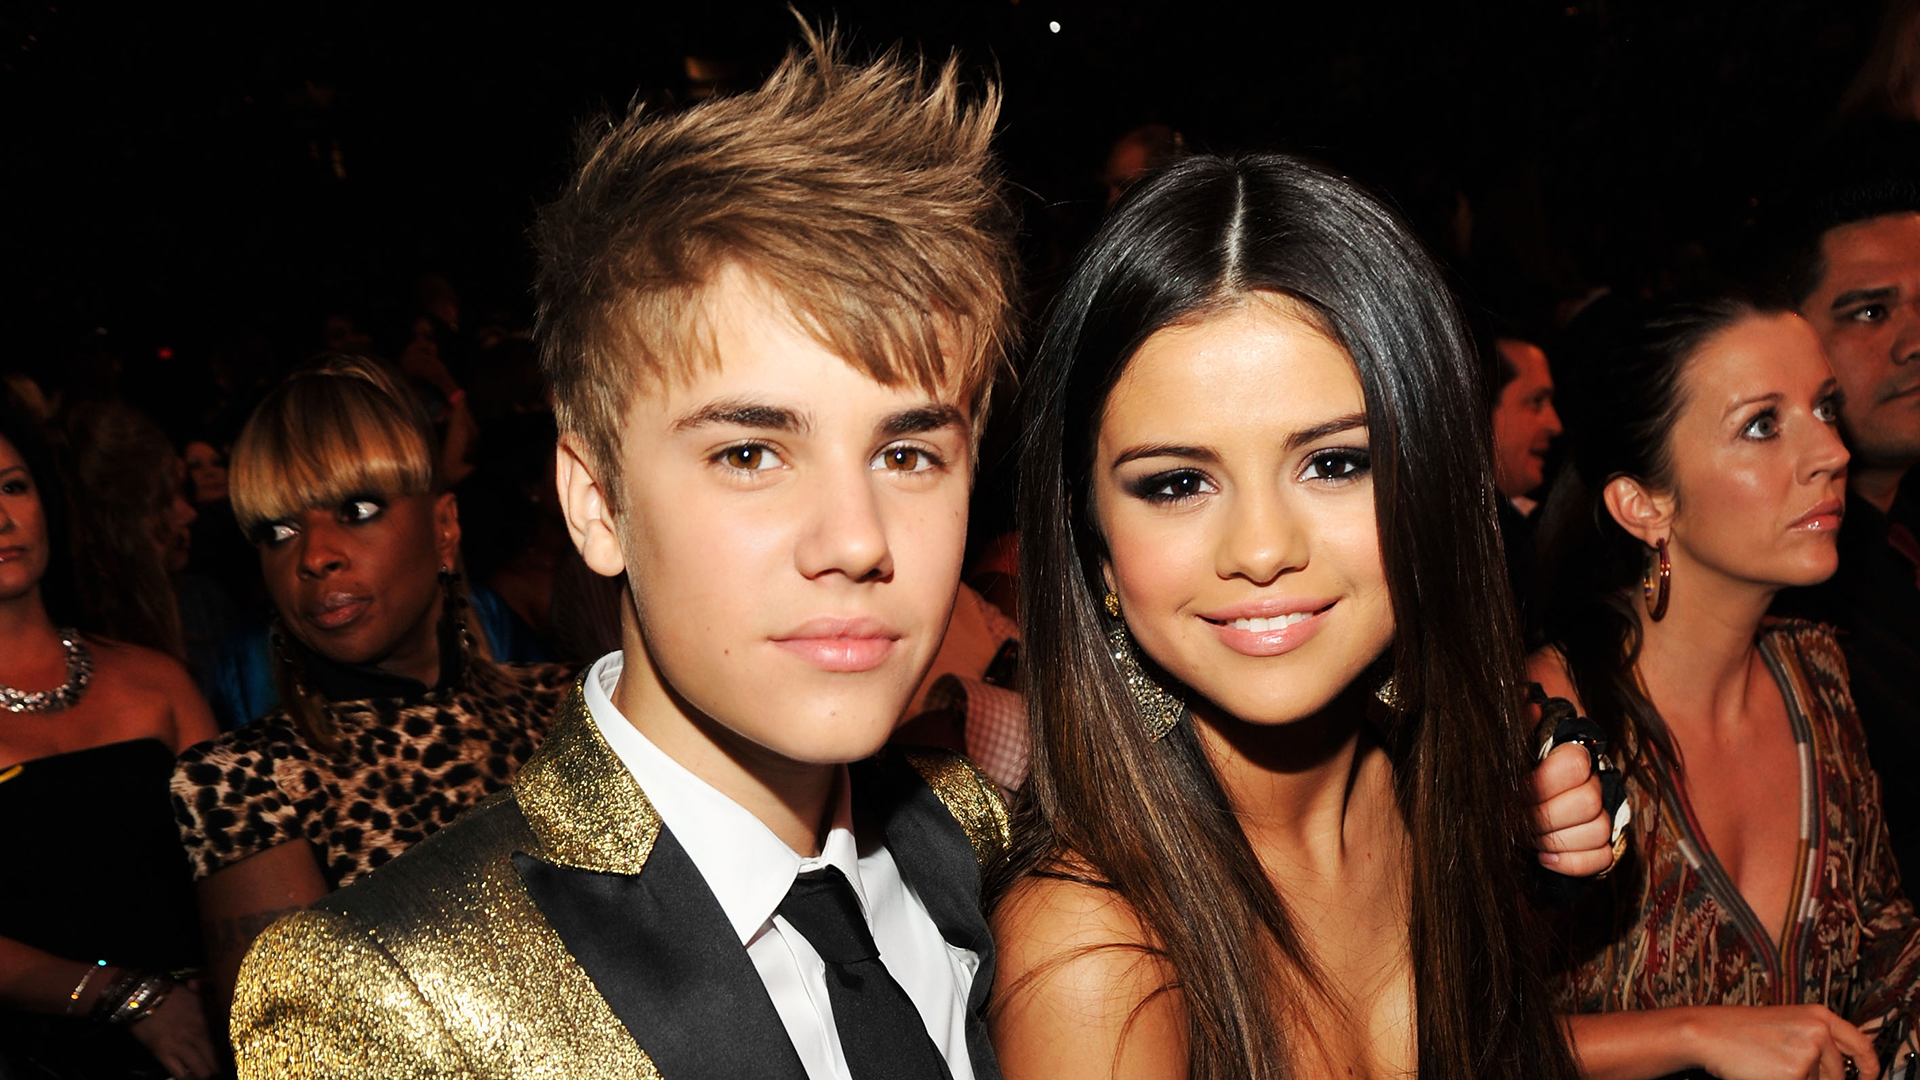 Selena Gomez and Justin Bieber relationship dating 